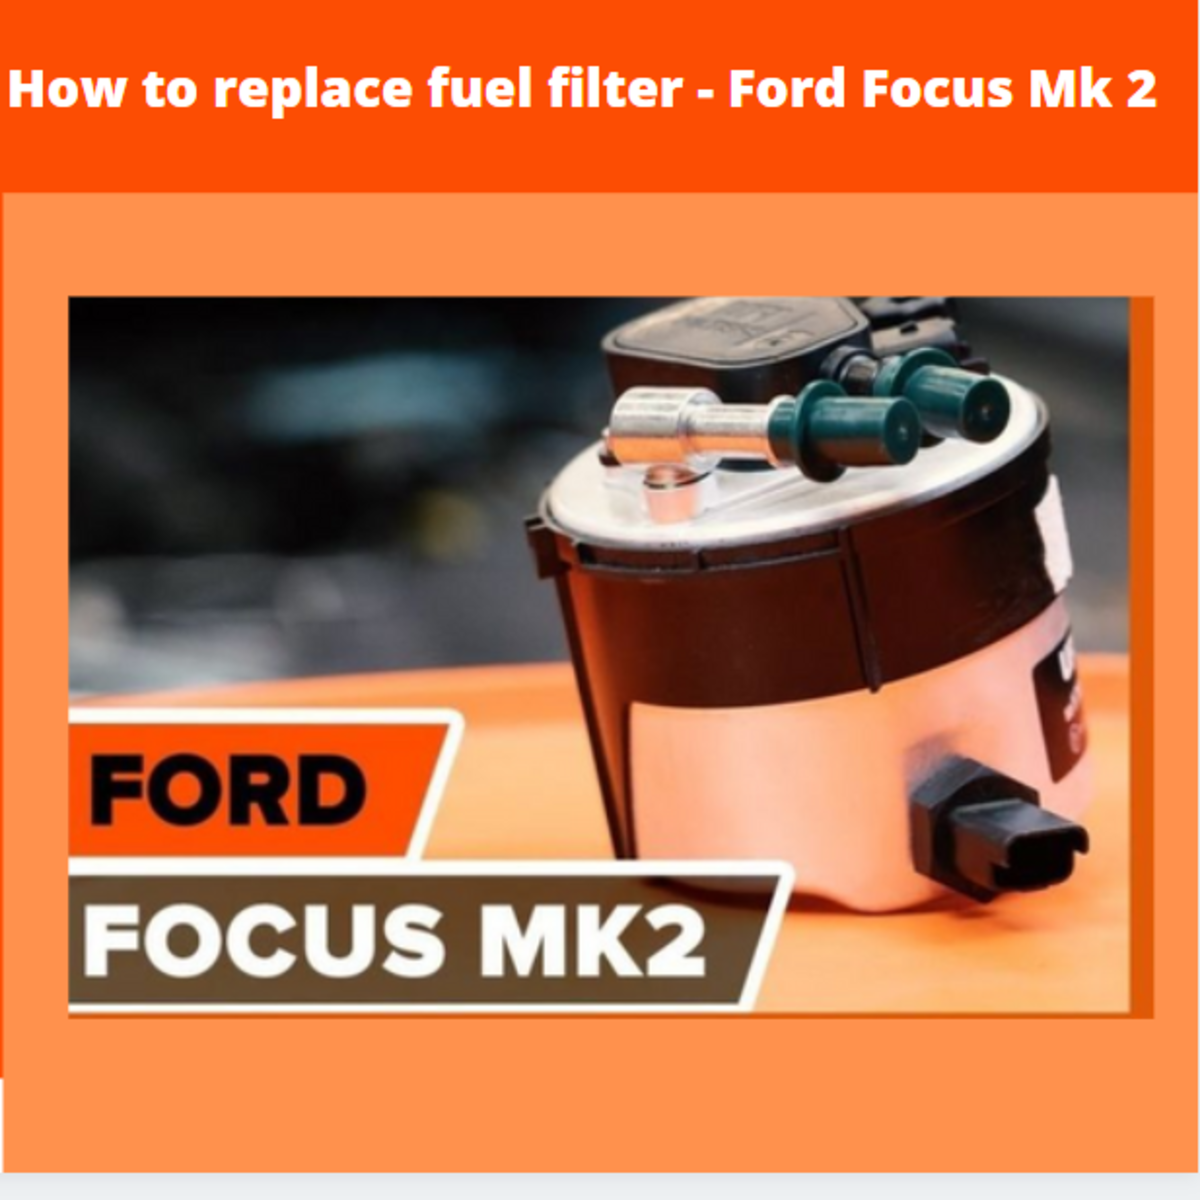 How to Replace the Fuel Filter on the Ford Focus Mk 2